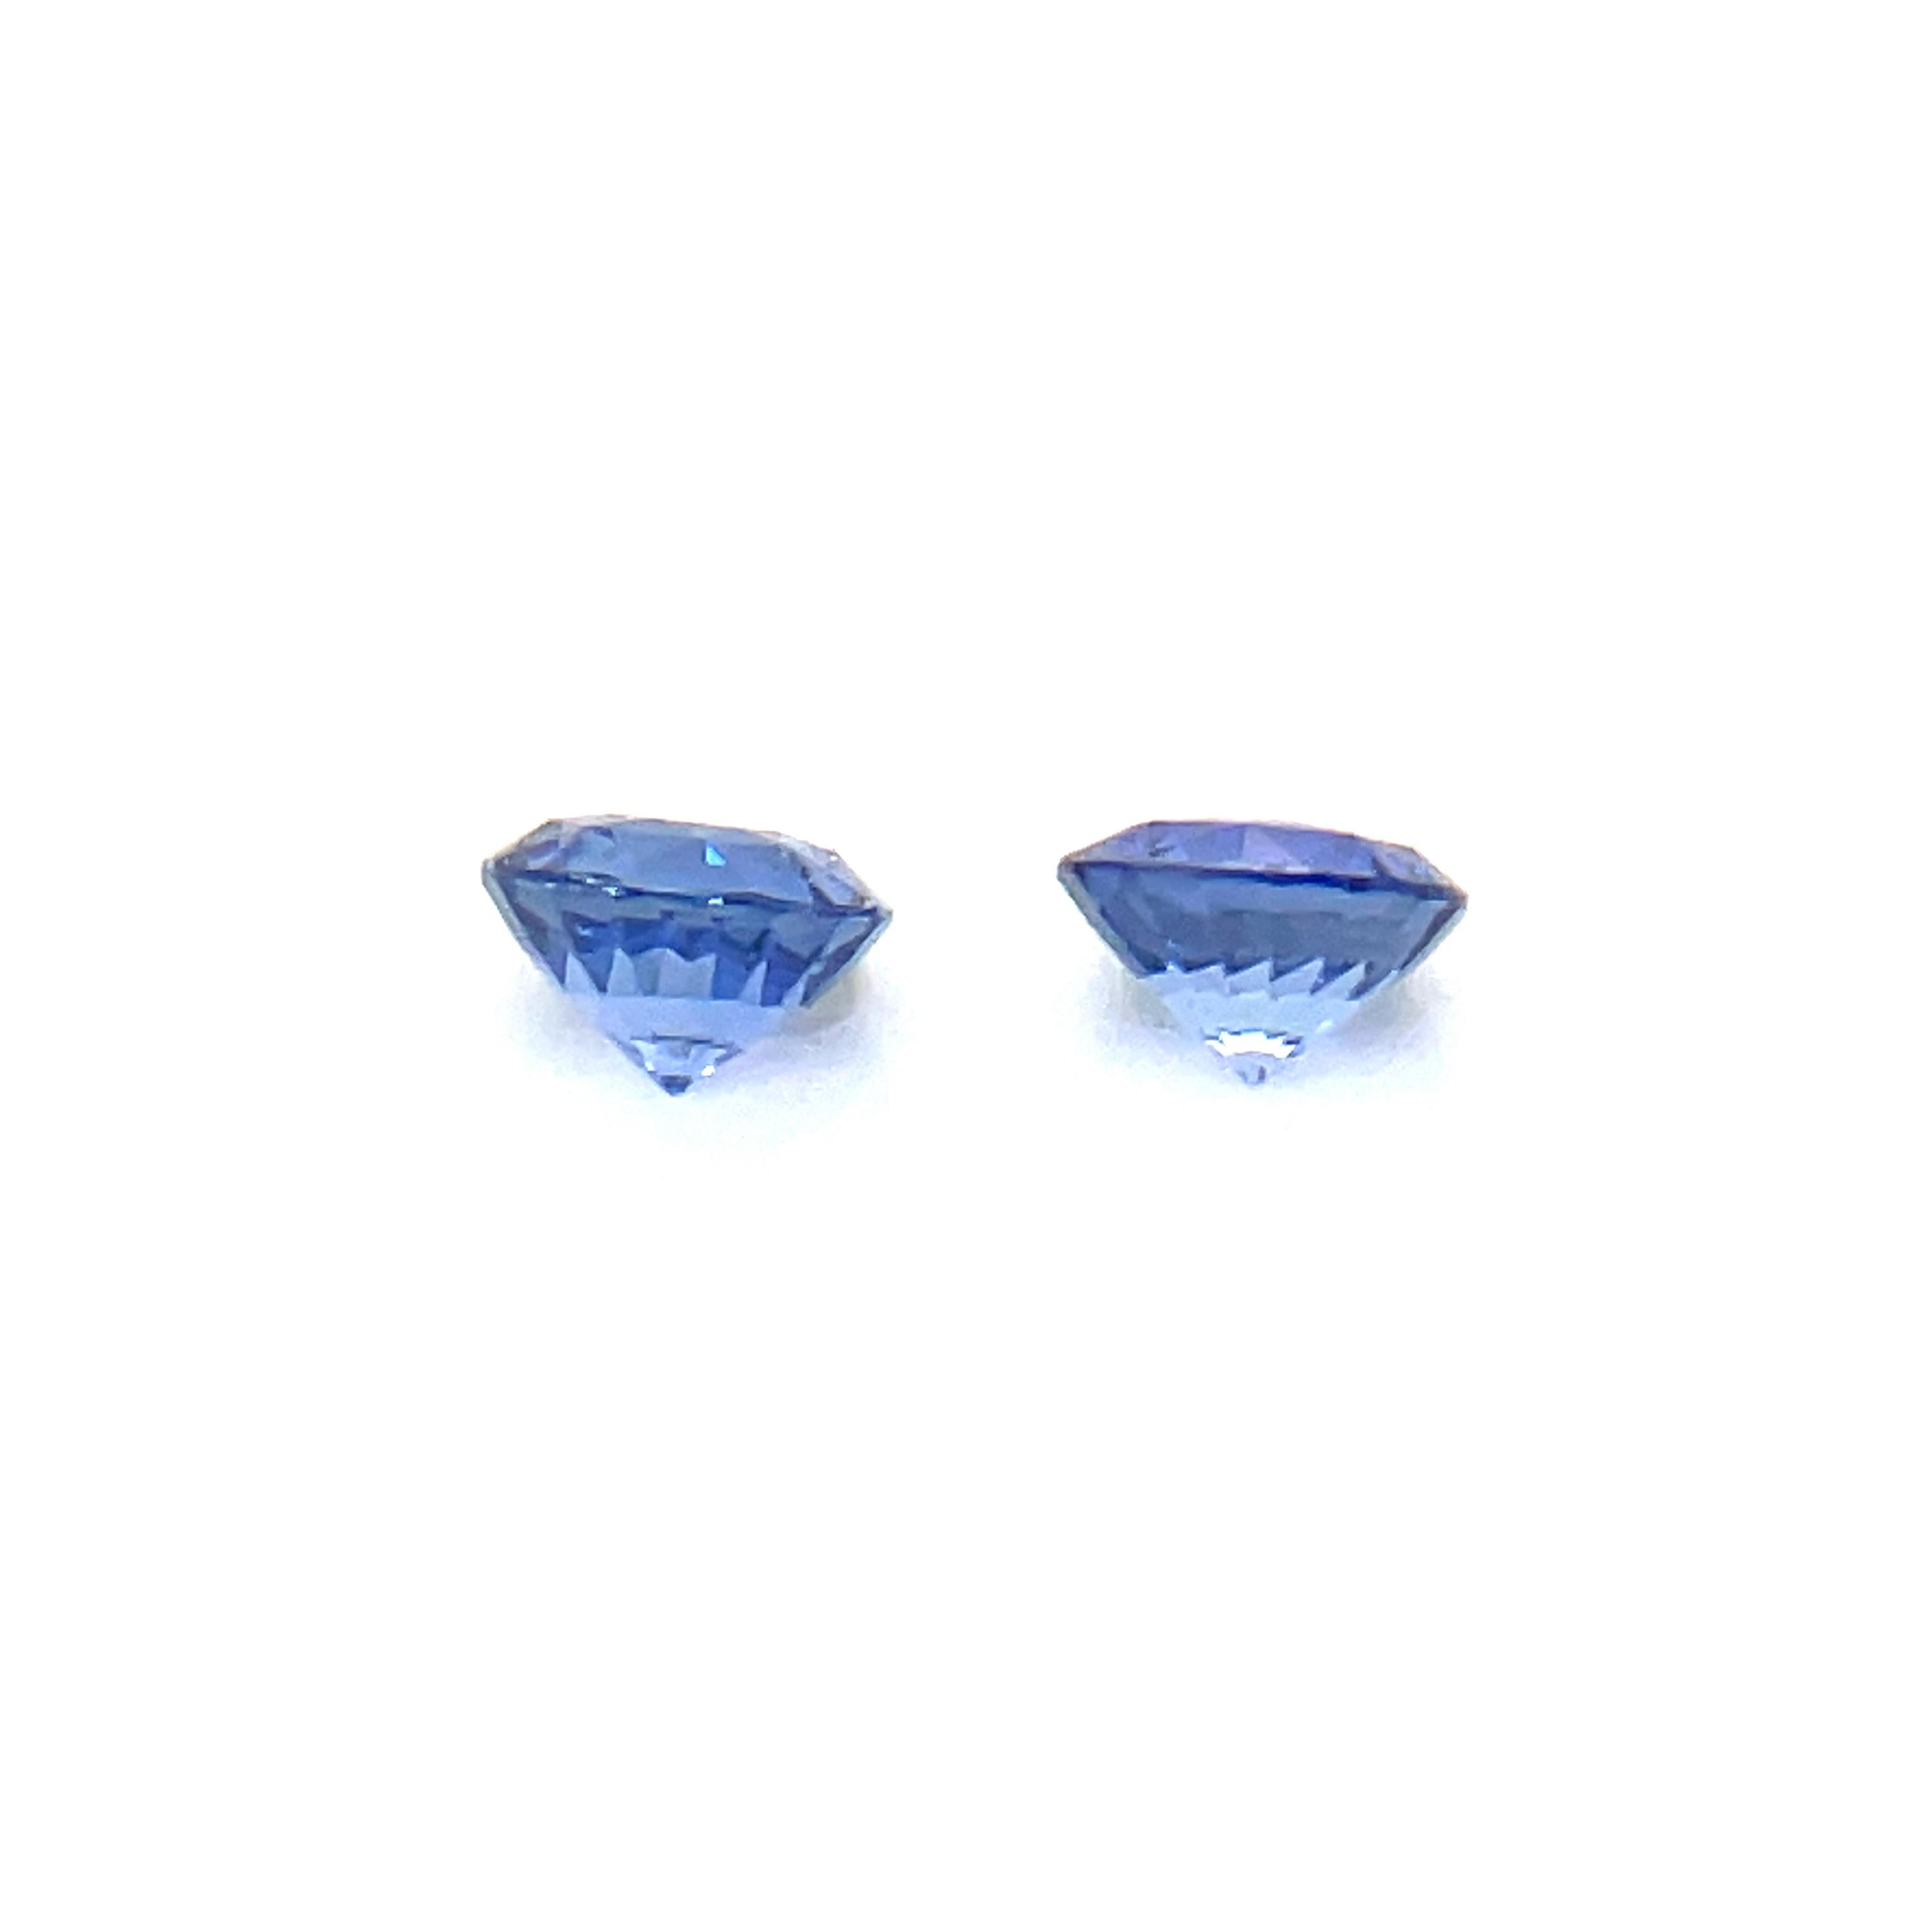 Round Cut 2 Natural Round Diamond-Cut Blue Sapphires Cts 1.21 For Sale